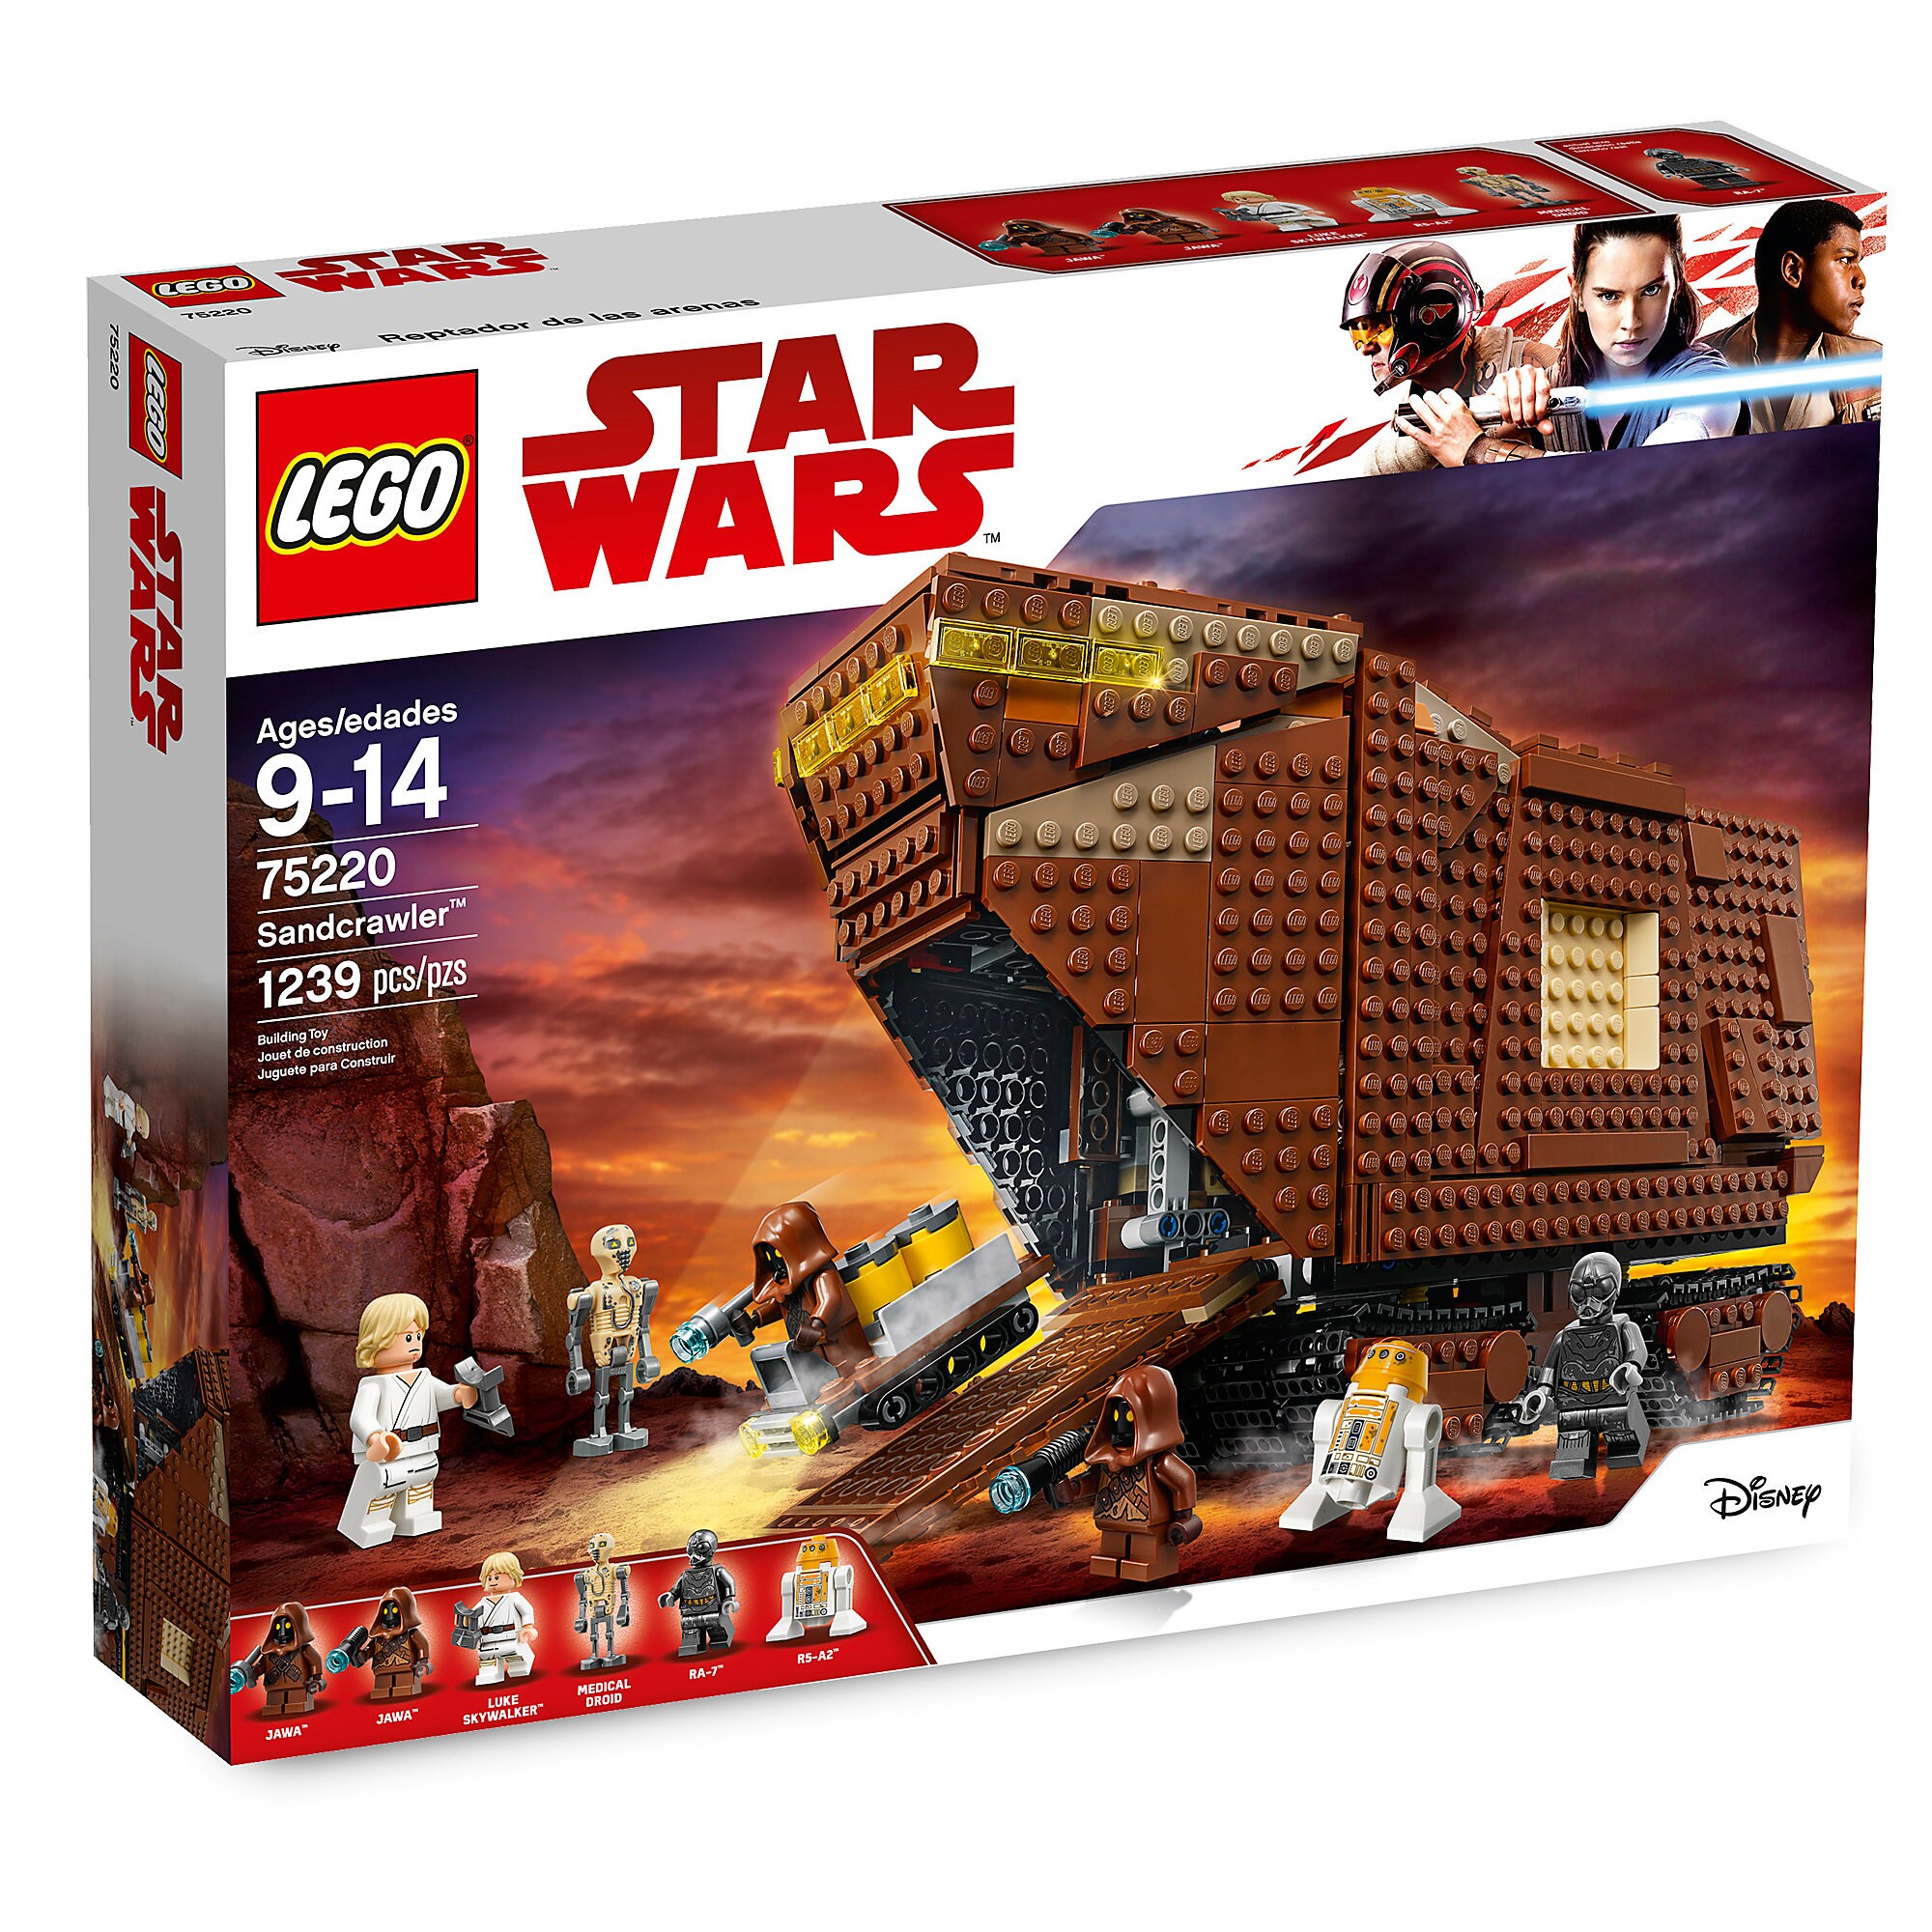 Sandcrawler Playset by LEGO - Star Wars: A New Hope